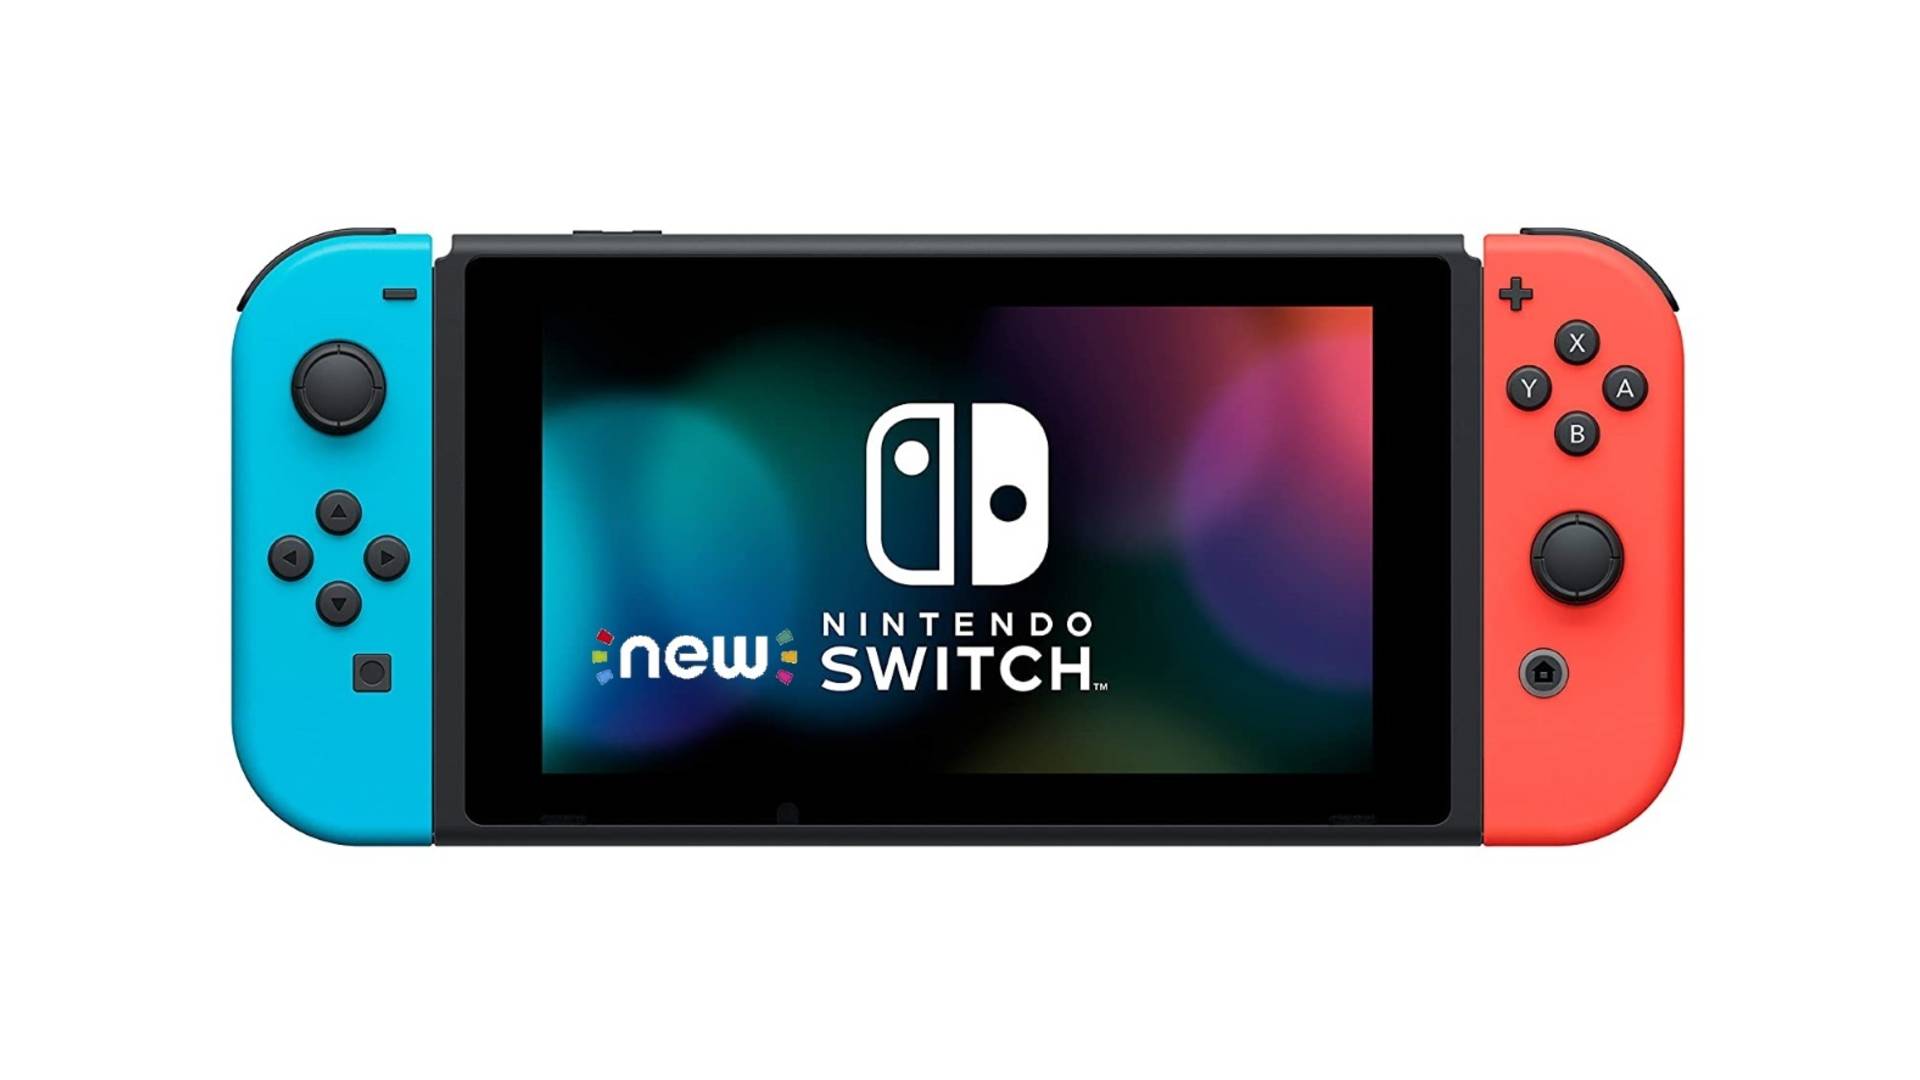 3 Nintendo Switch Pro improvements I'd love to see